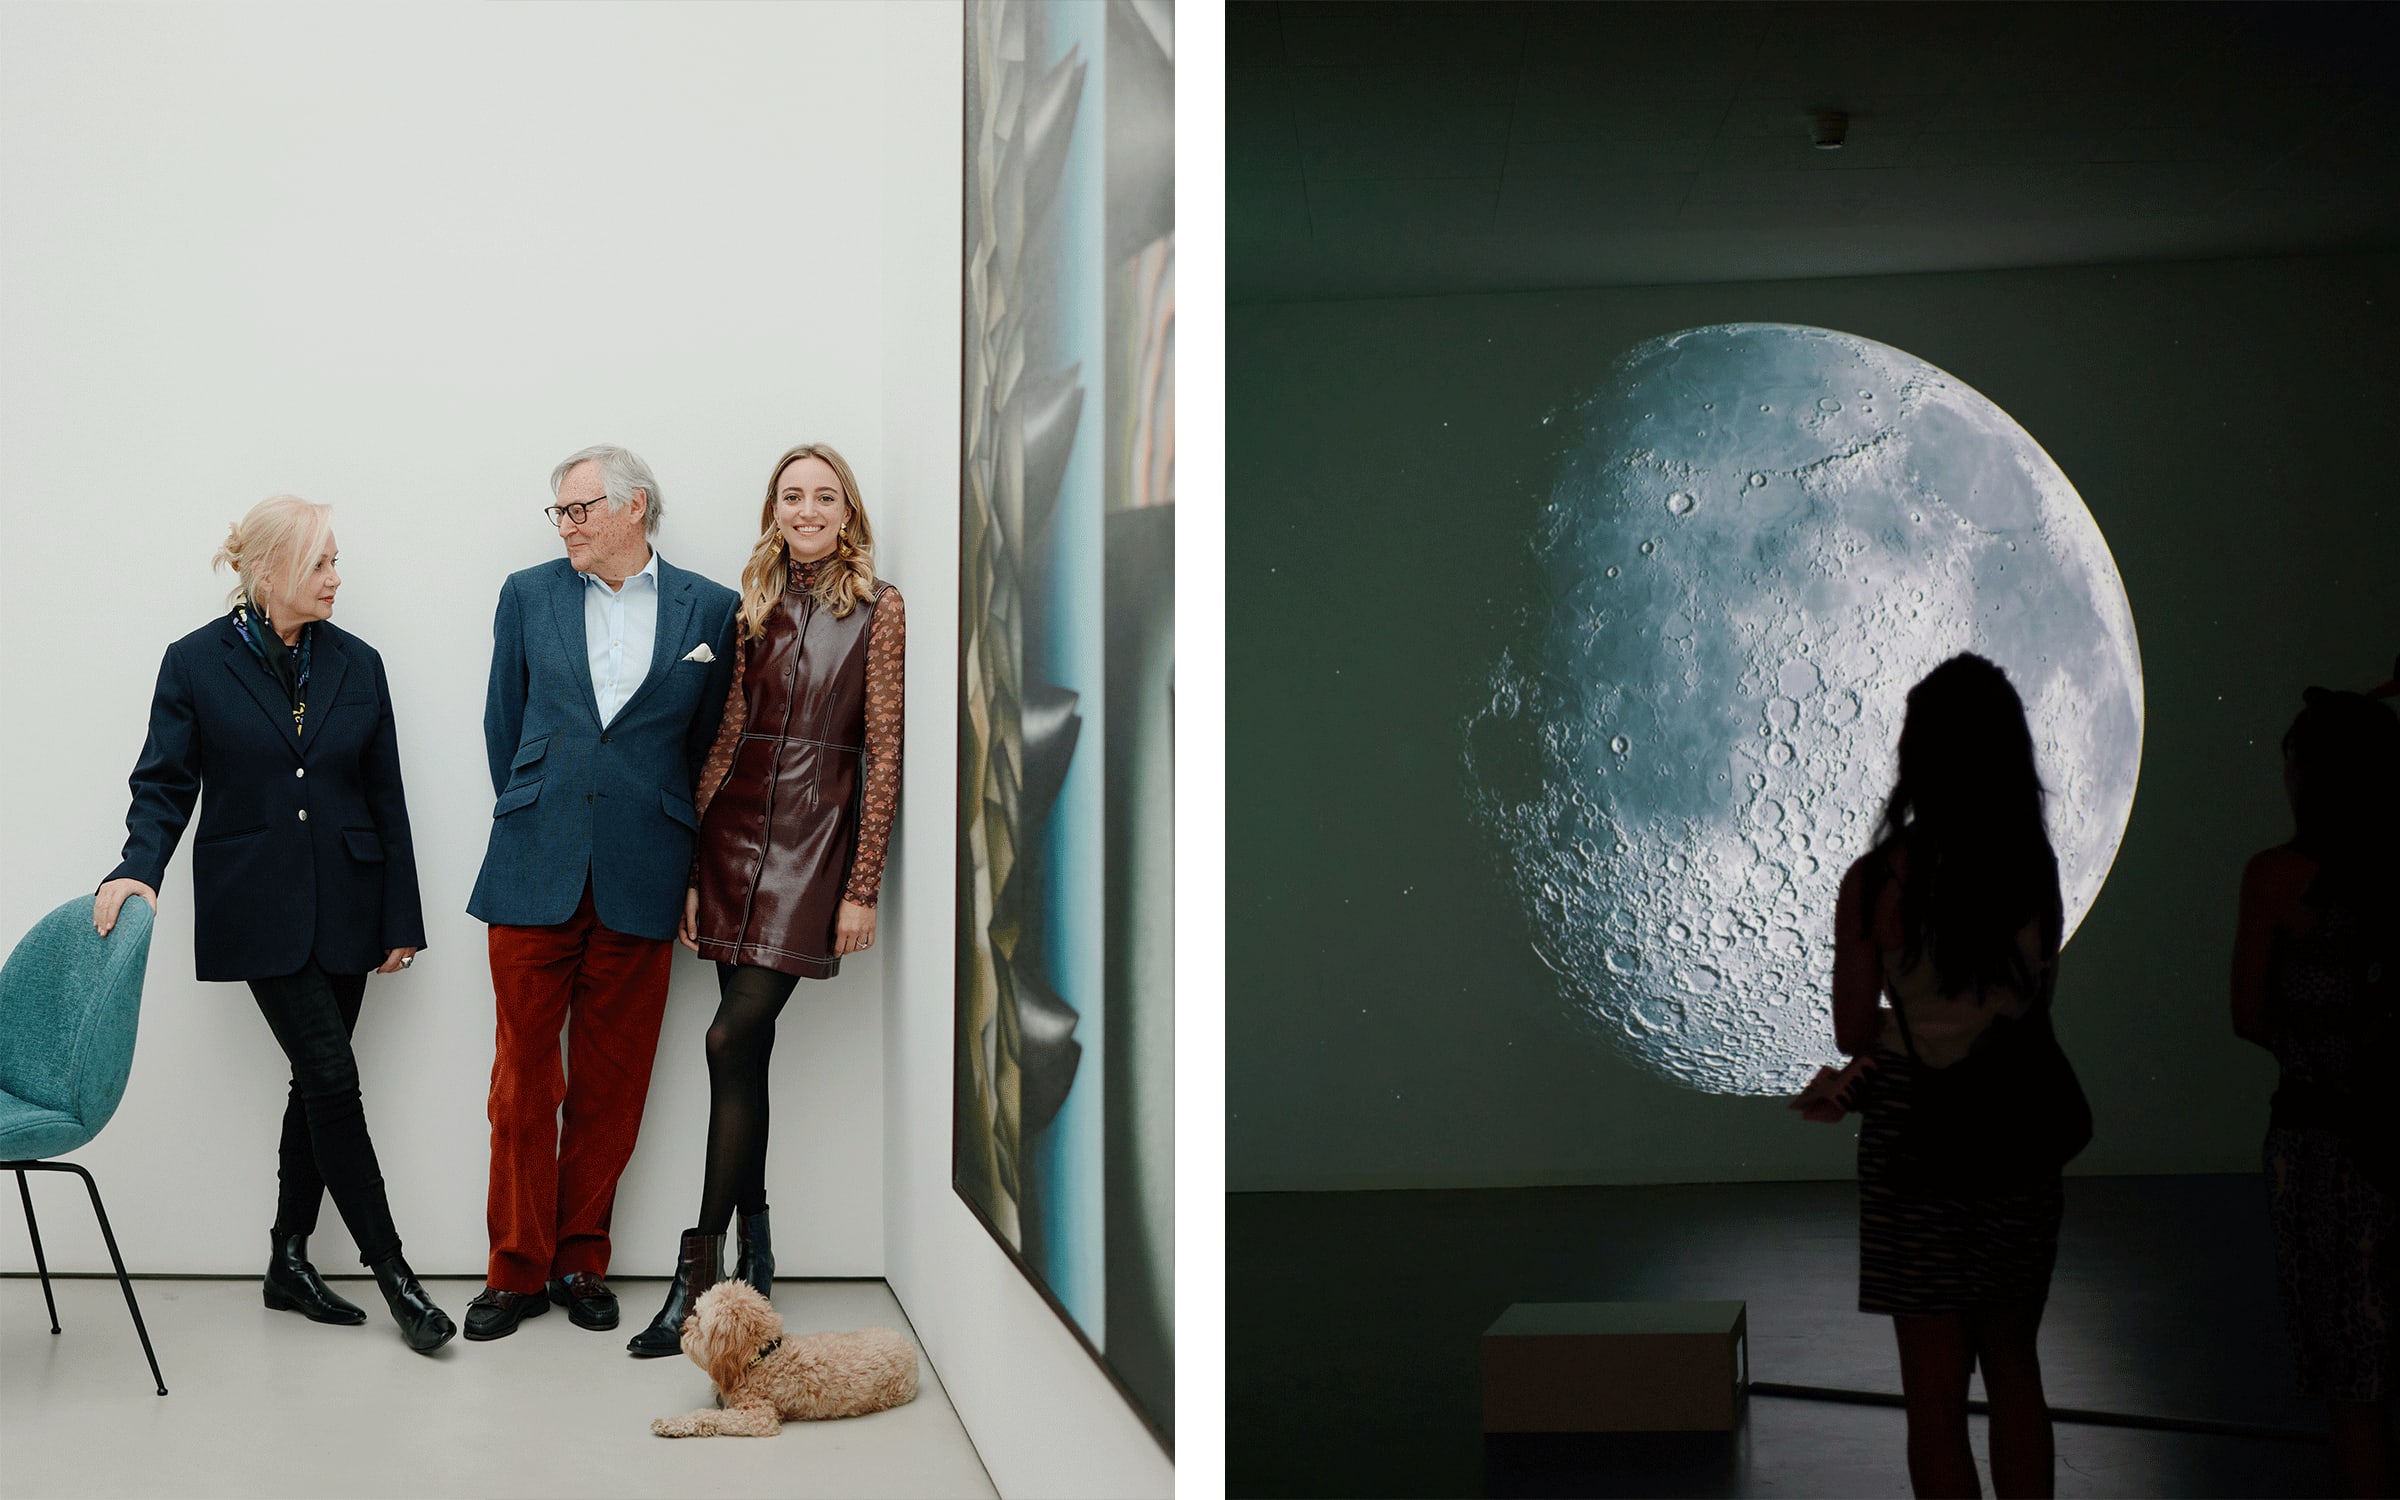 Left: Lucy Mitchell-Innes, David Nash, and Josephine Nash. Photograph by William Jess Laird. Right: Installation view of an artwork by Jacolby Satterwhite, presented by Mitchell-Innes & Nash in the Parcours sector at Art Basel in Basel 2023.